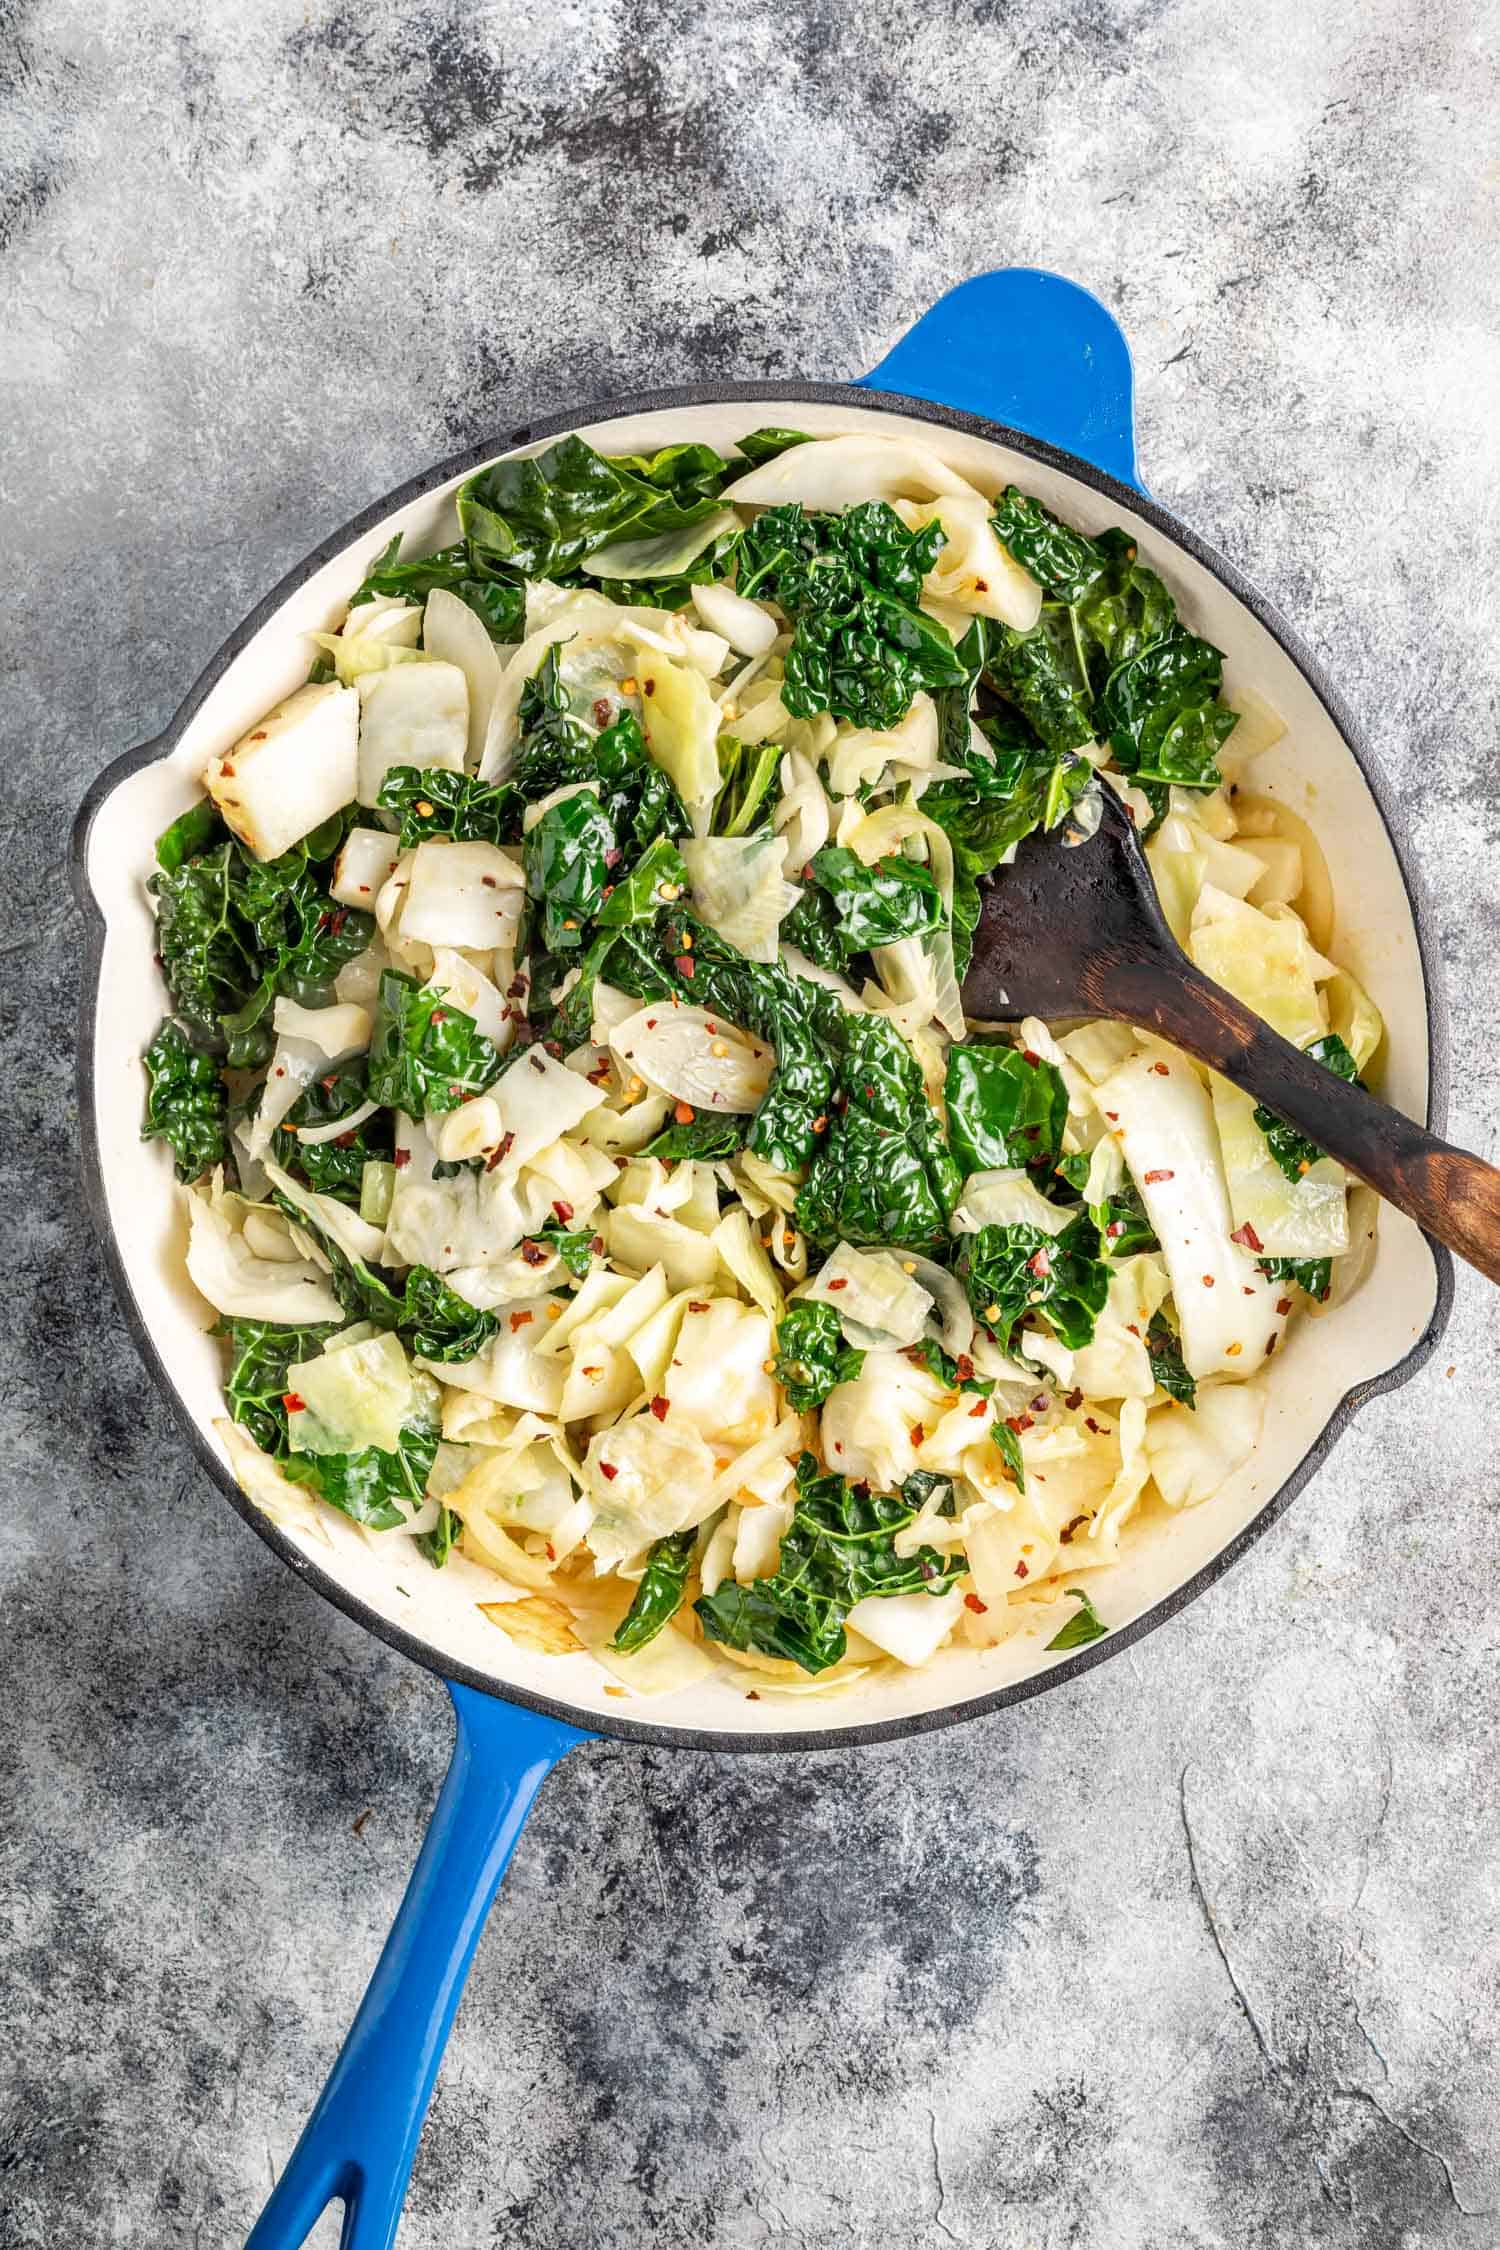 Sautéed Cabbage and Kale in a enameled cast-iron skillet